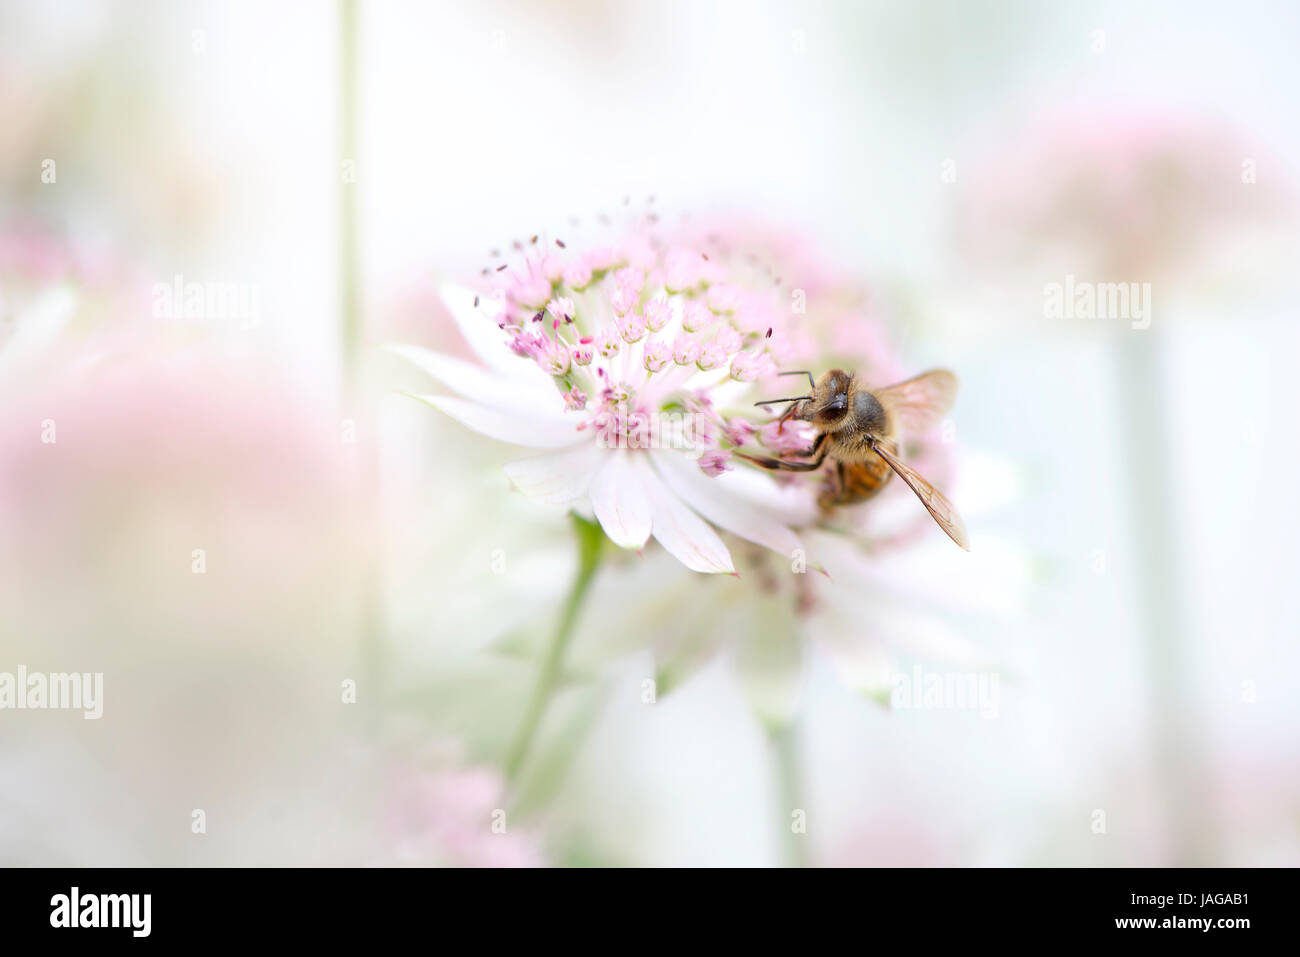 Close-up image of a honey bee pollinating a summer Astrantia pink flower also known as Masterwort. Flora & Fauna concepts Stock Photo